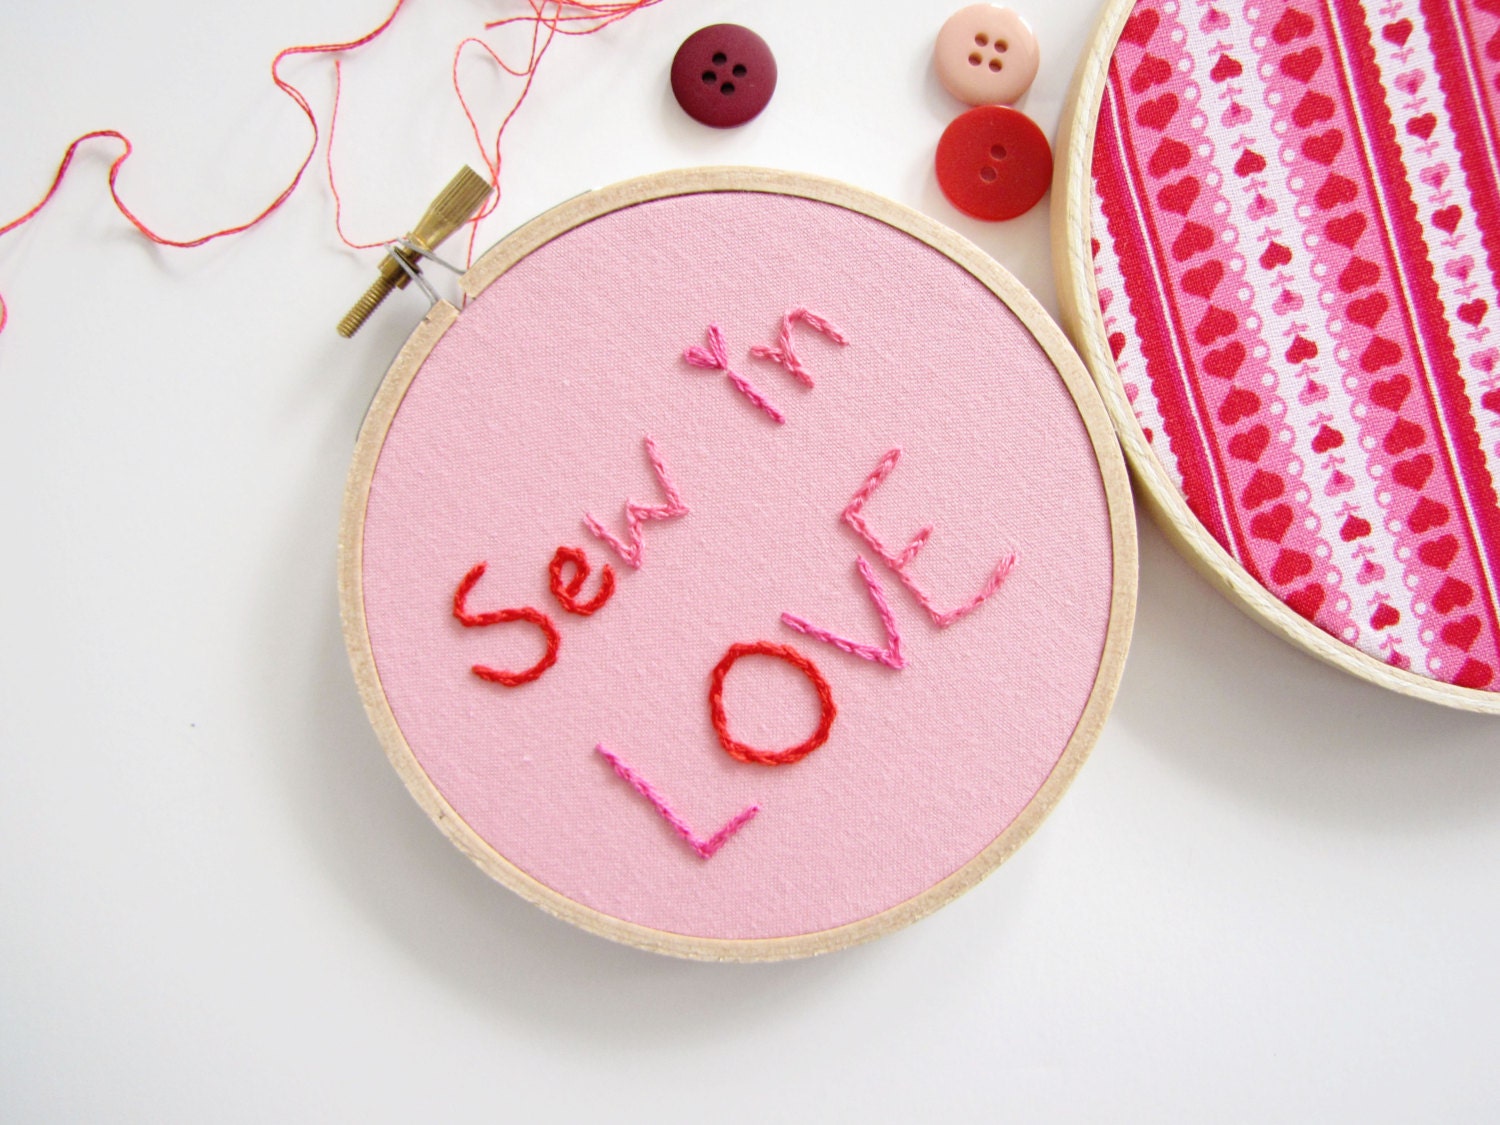 Embroidery Hoop Romantic Wall Art Set of Two - "Sew in Love" in red and pink, hearts, Valentines Day gift, wedding prop, holiday decoration